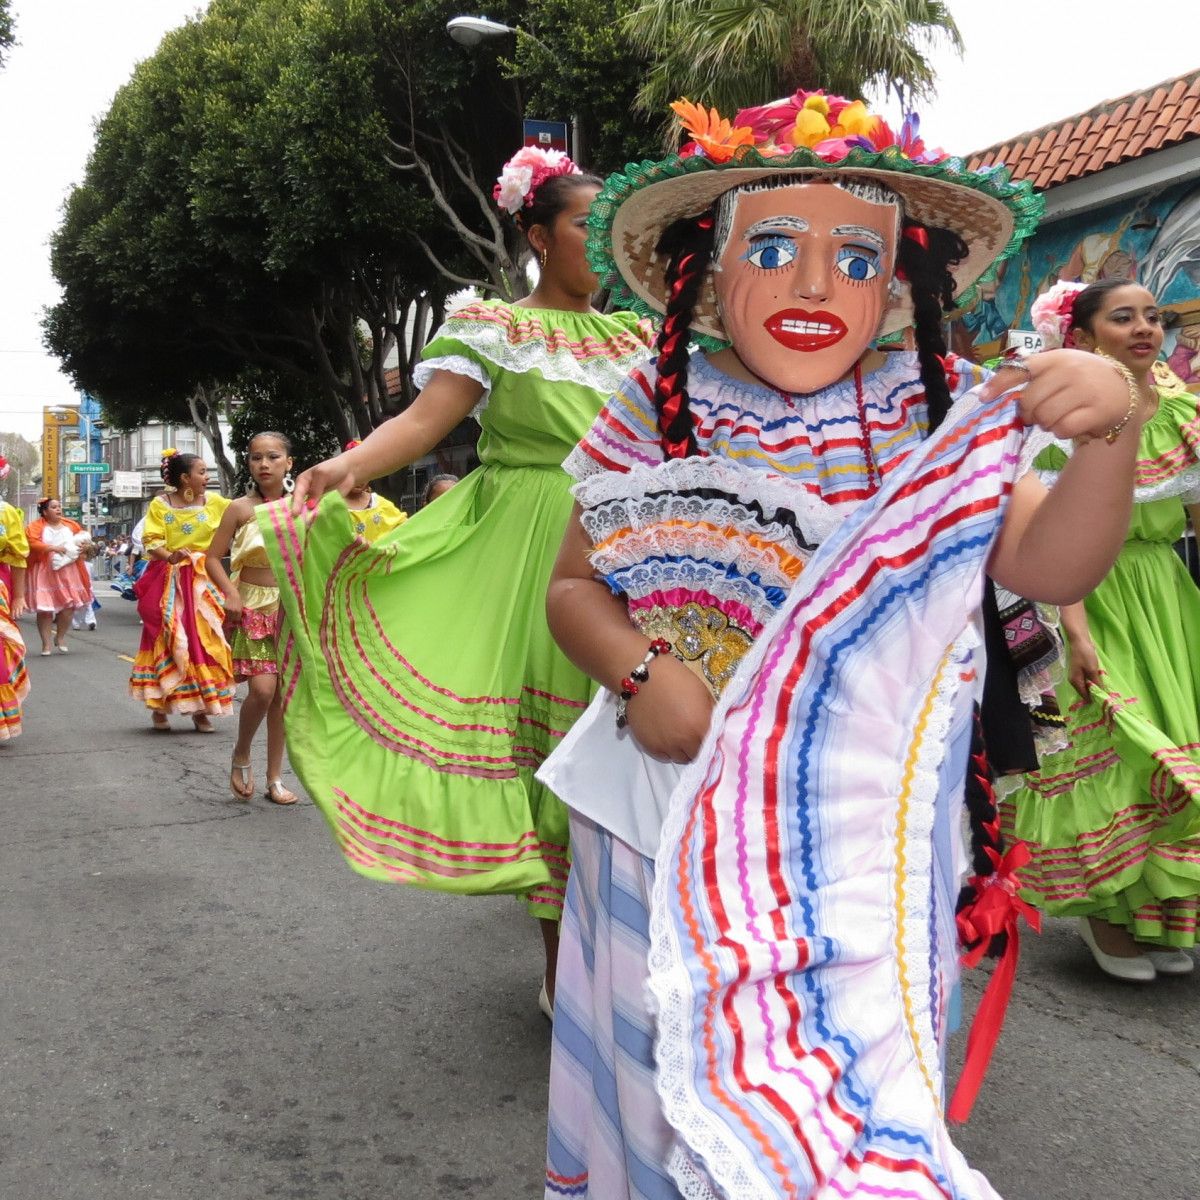 nicaraguan culture and traditions